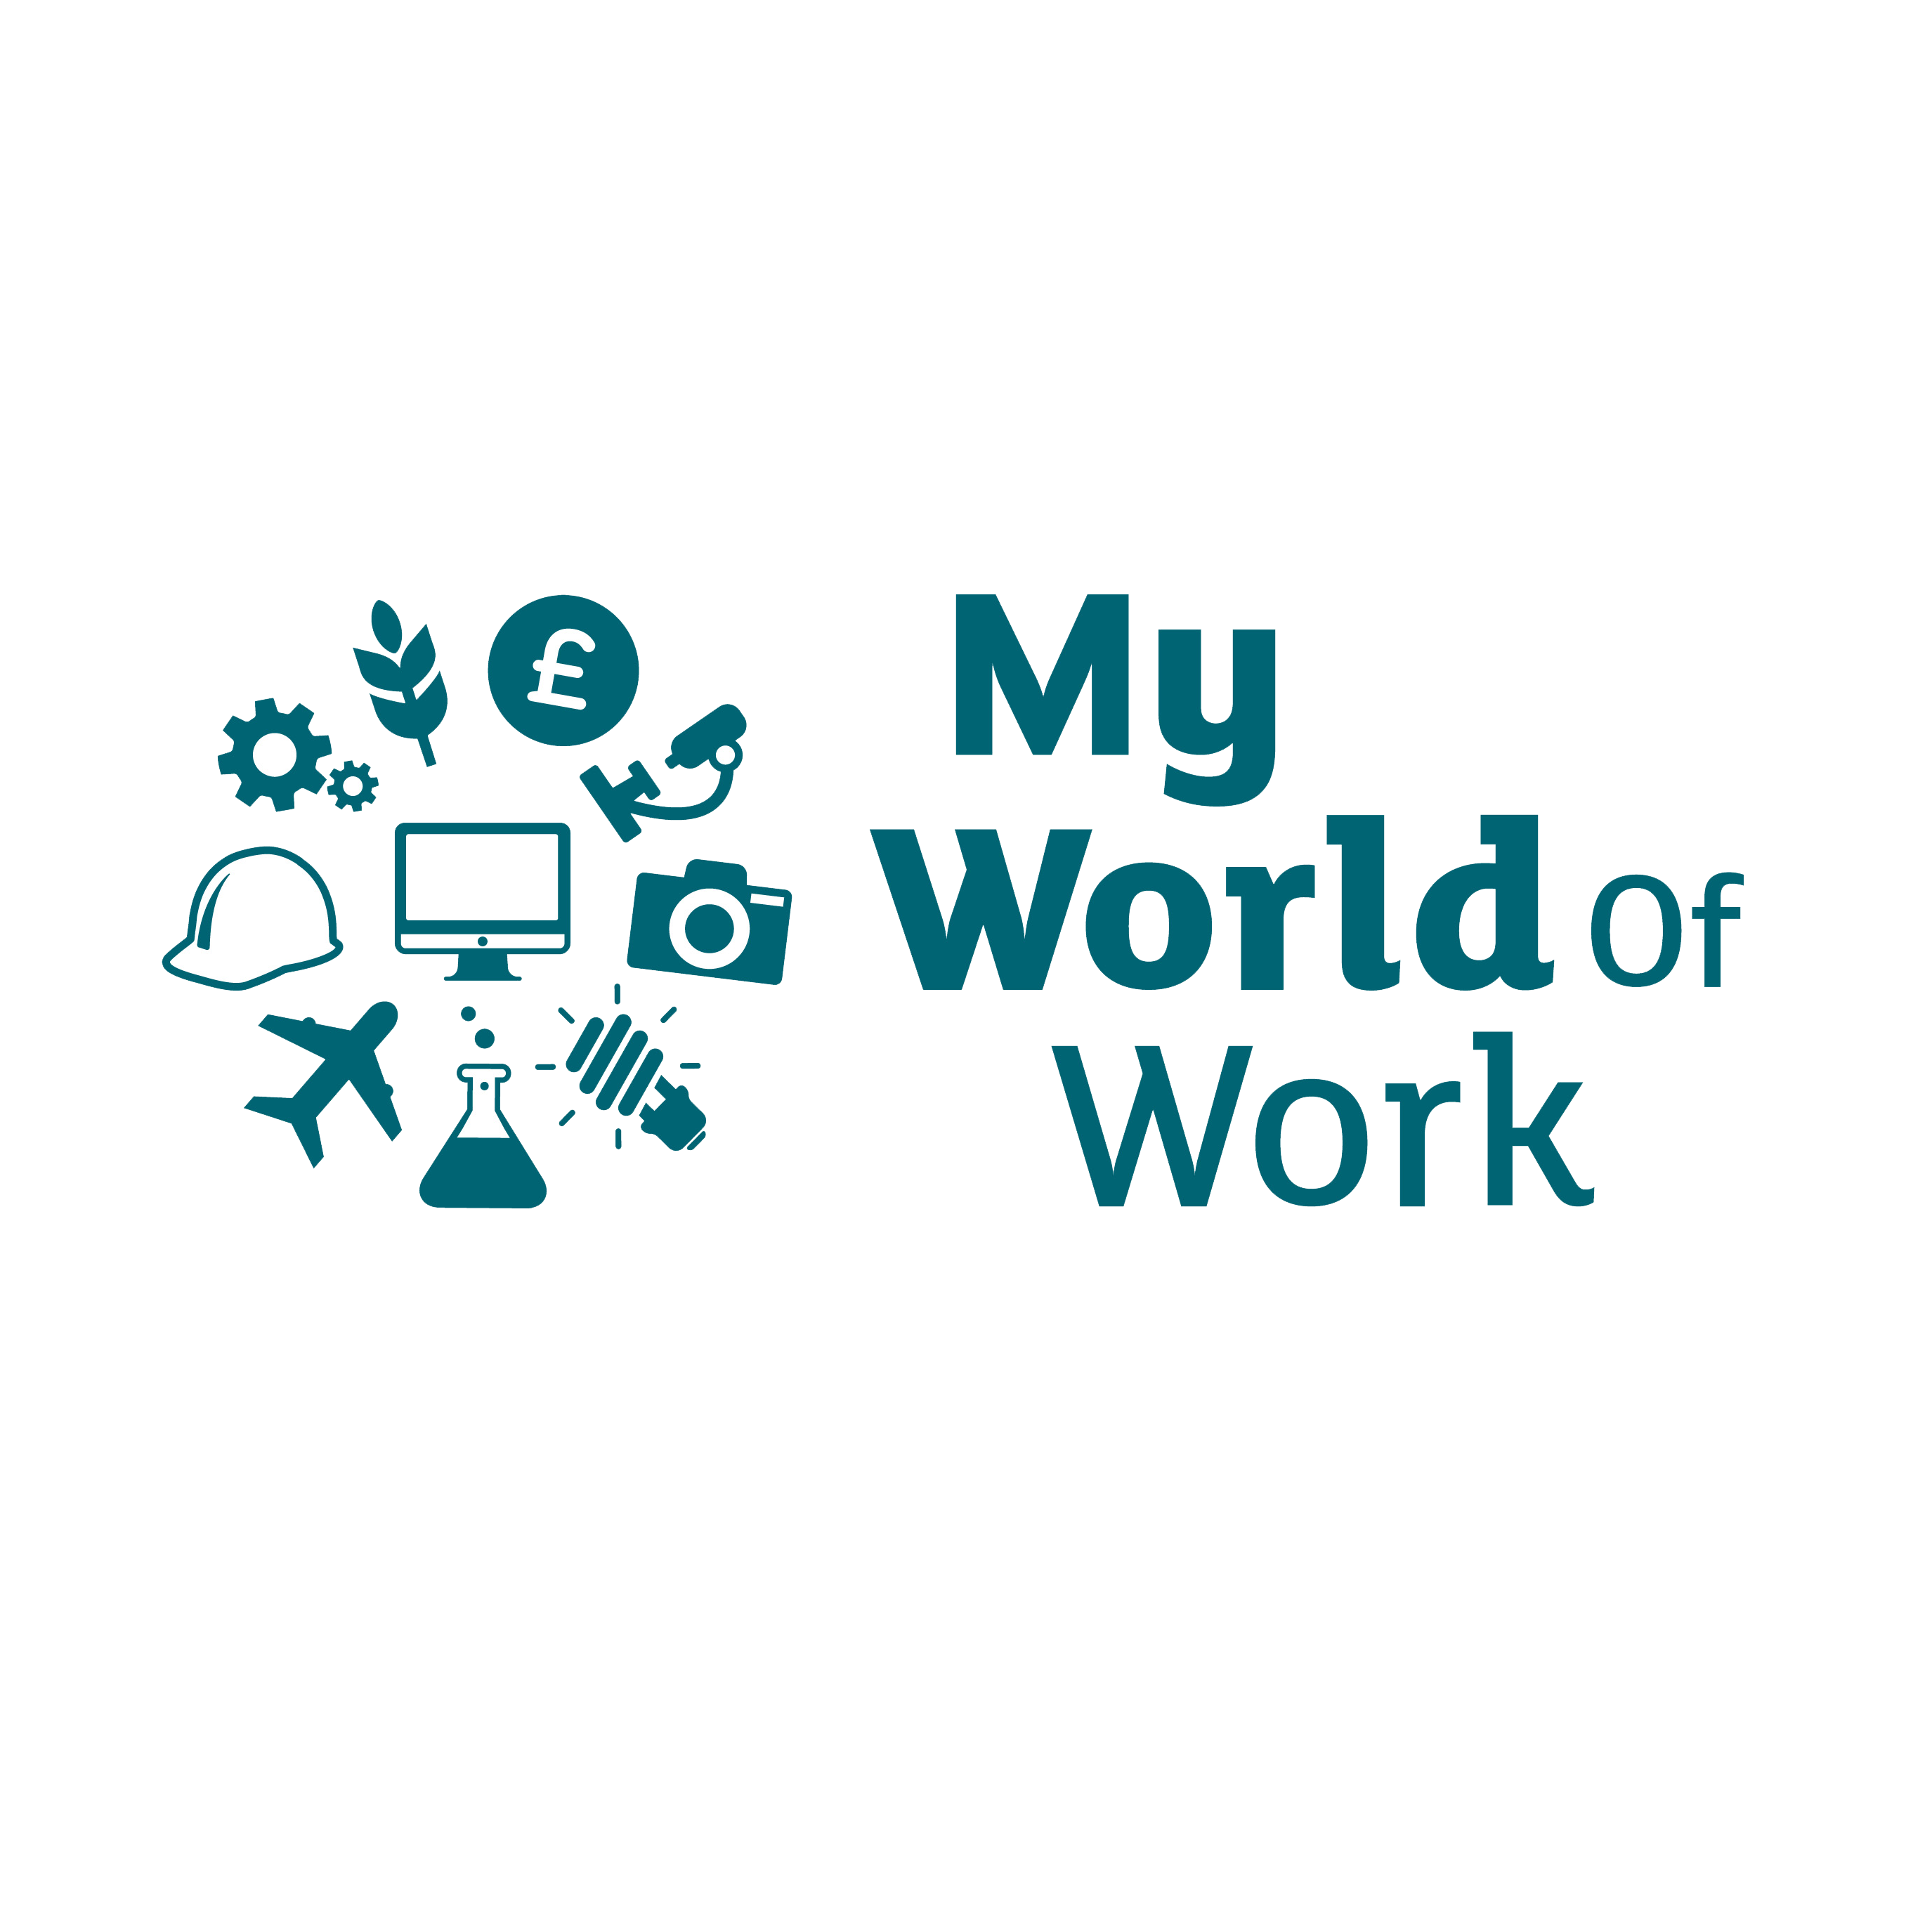 The world of work in russia проект. The World of work. Проект на тему the World of work in Russia. The World of work in Russia картинка.